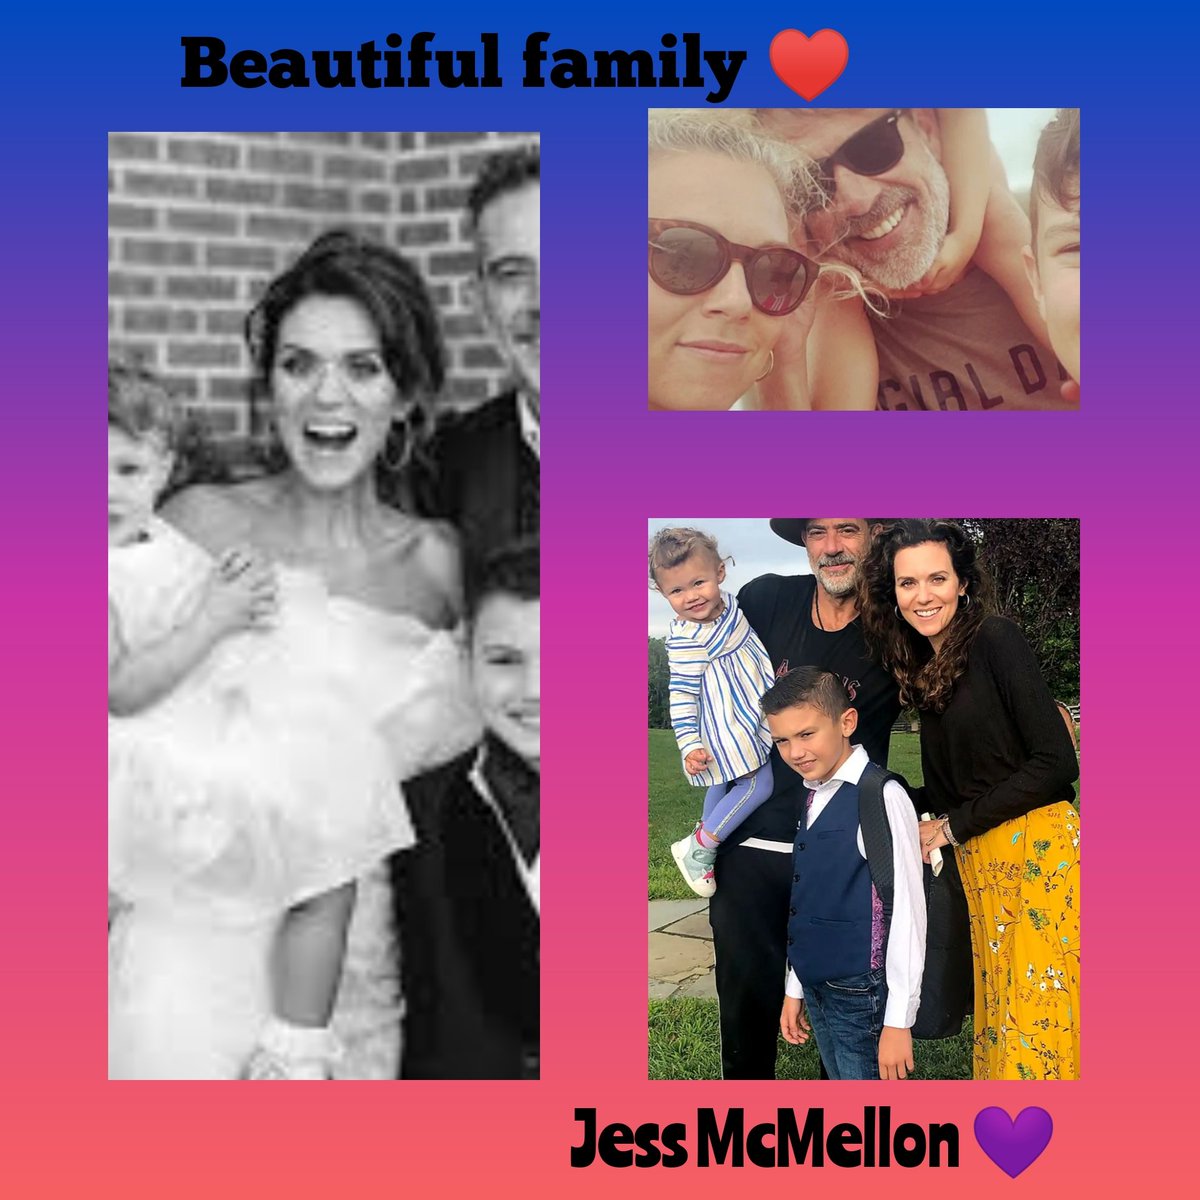 Awesome and beautiful family JDM💜YOU CAN SEE THE LOVE 

@JDMorgan @HilarieBurton 
#jeffreyTWDJDM #lovenote #appreciationpost #family #wesupportyou #edits #arts